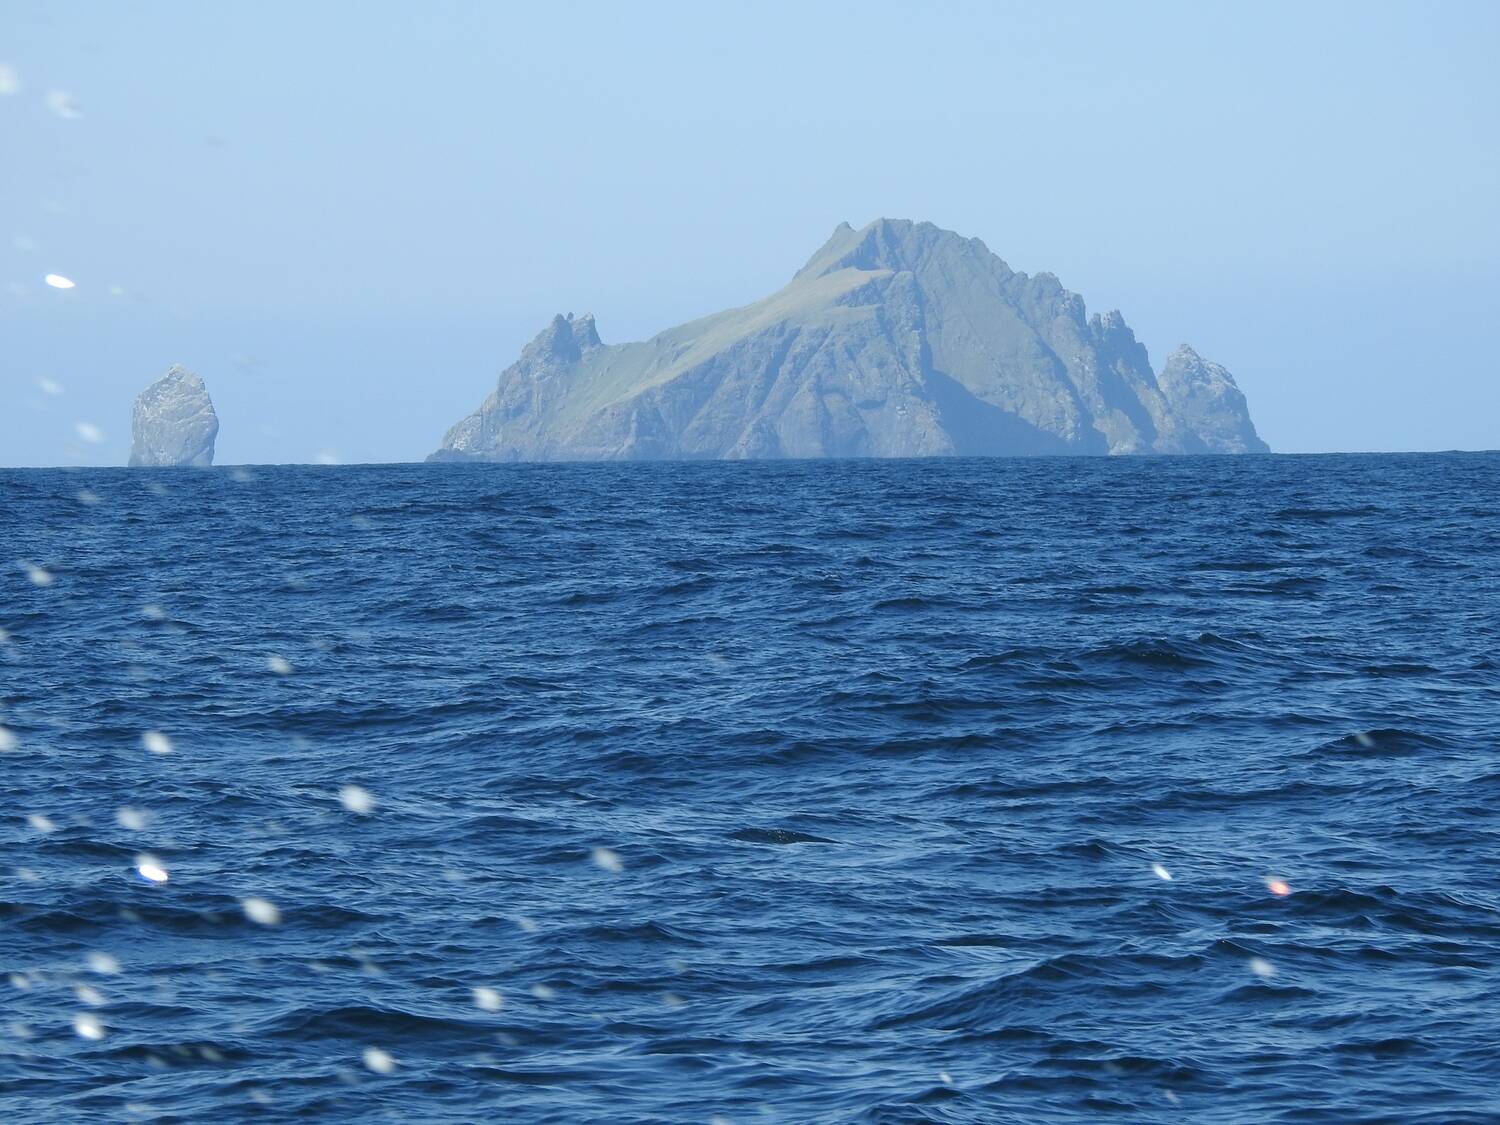 A rugged, steep-sided island rises out of the blue sea on the hazy horizon. A small island/sea stack rises just to the left of the main island. Small water droplets can be seen on the camera lens.